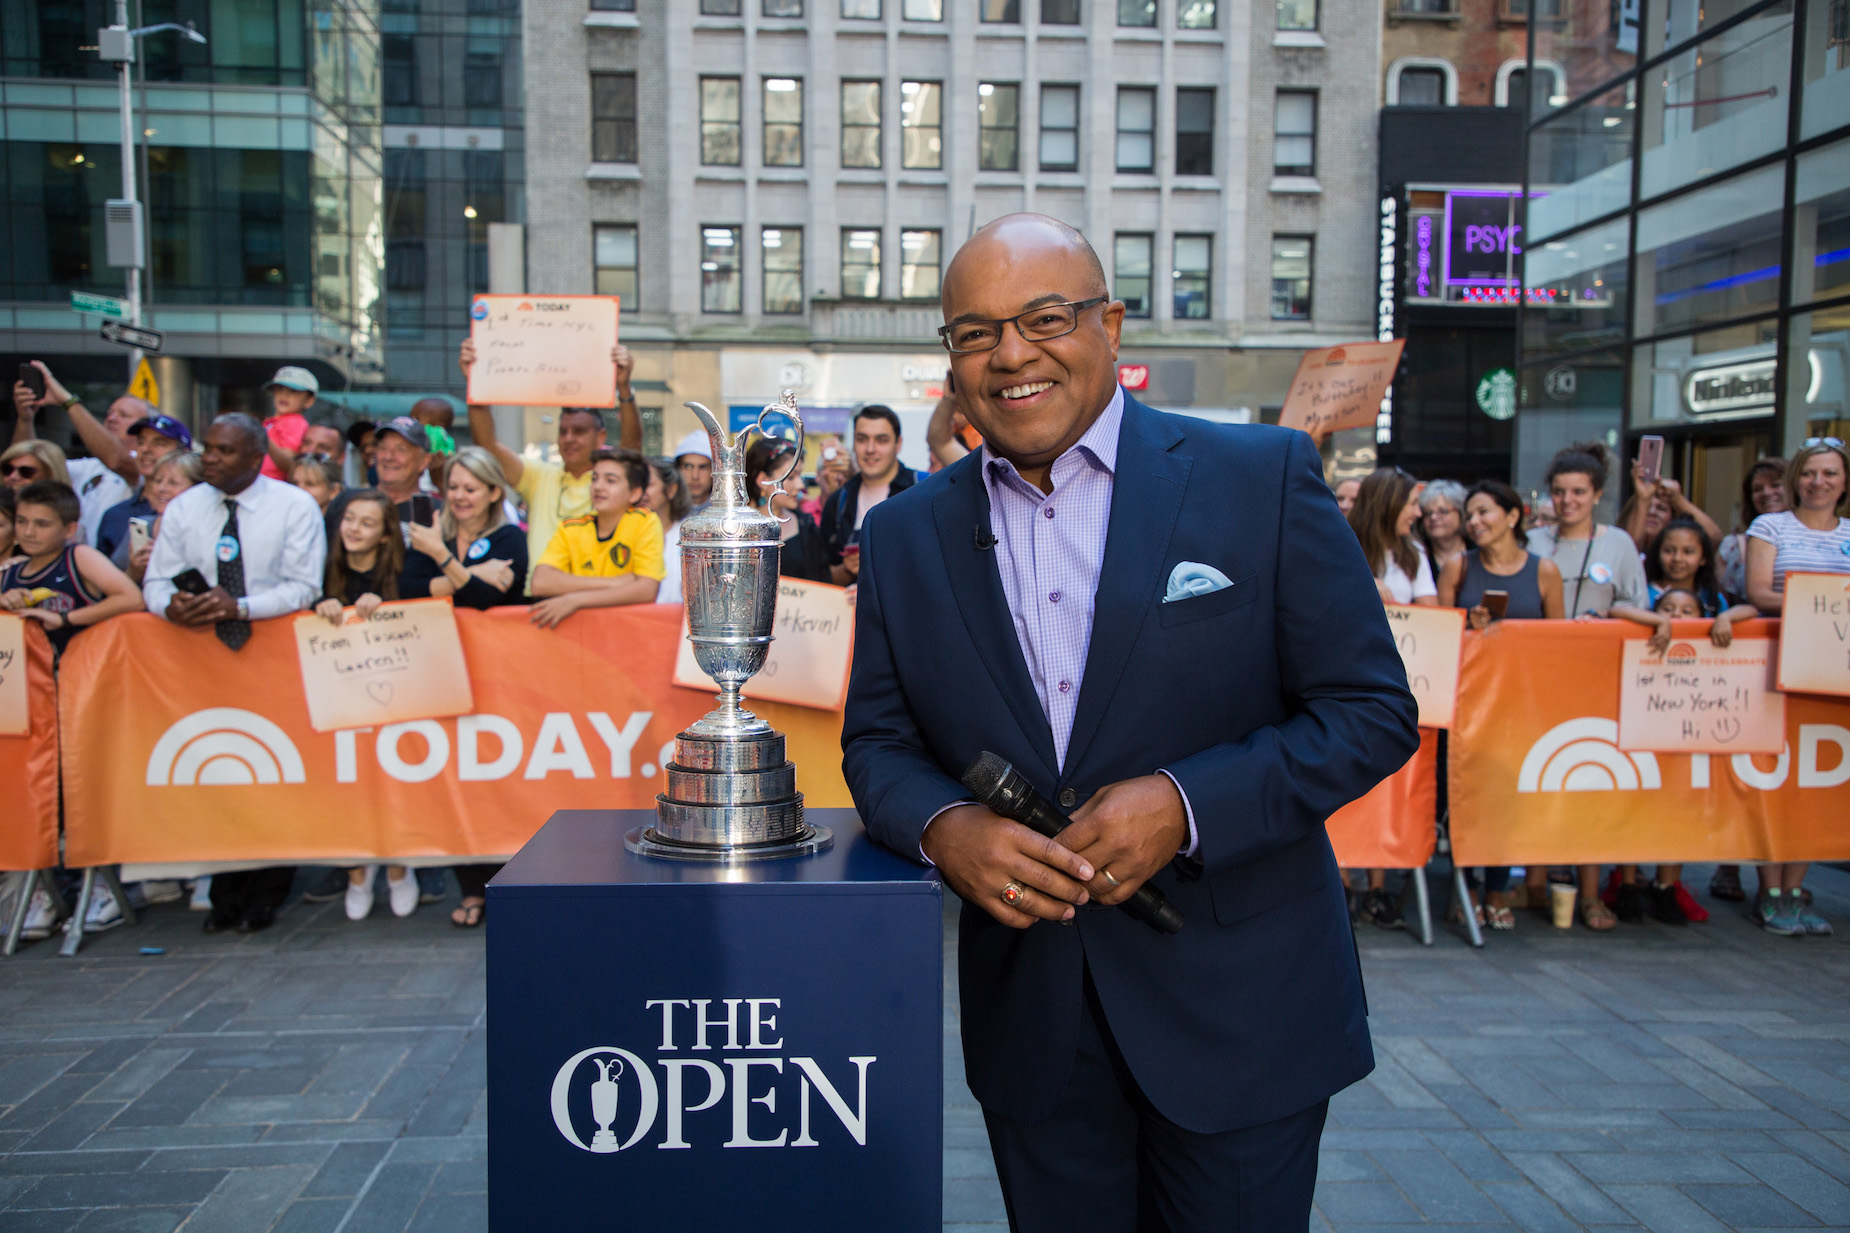 NBC's Mike Tirico once raised some eyebrows with comments about his race.